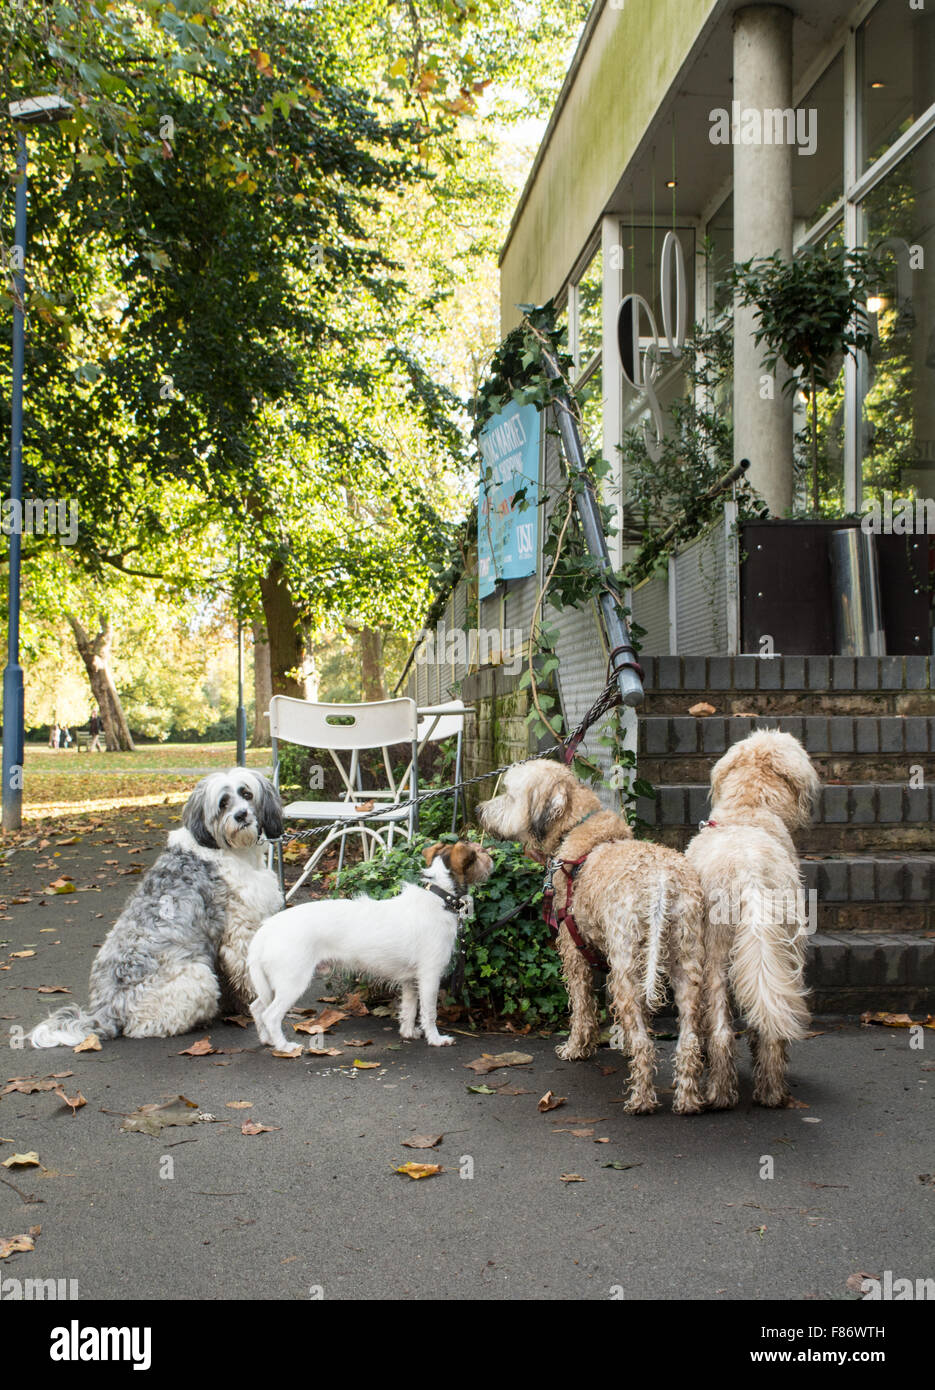 A pack of dogs waiting obediently outside a cafe in London, UK Stock Photo